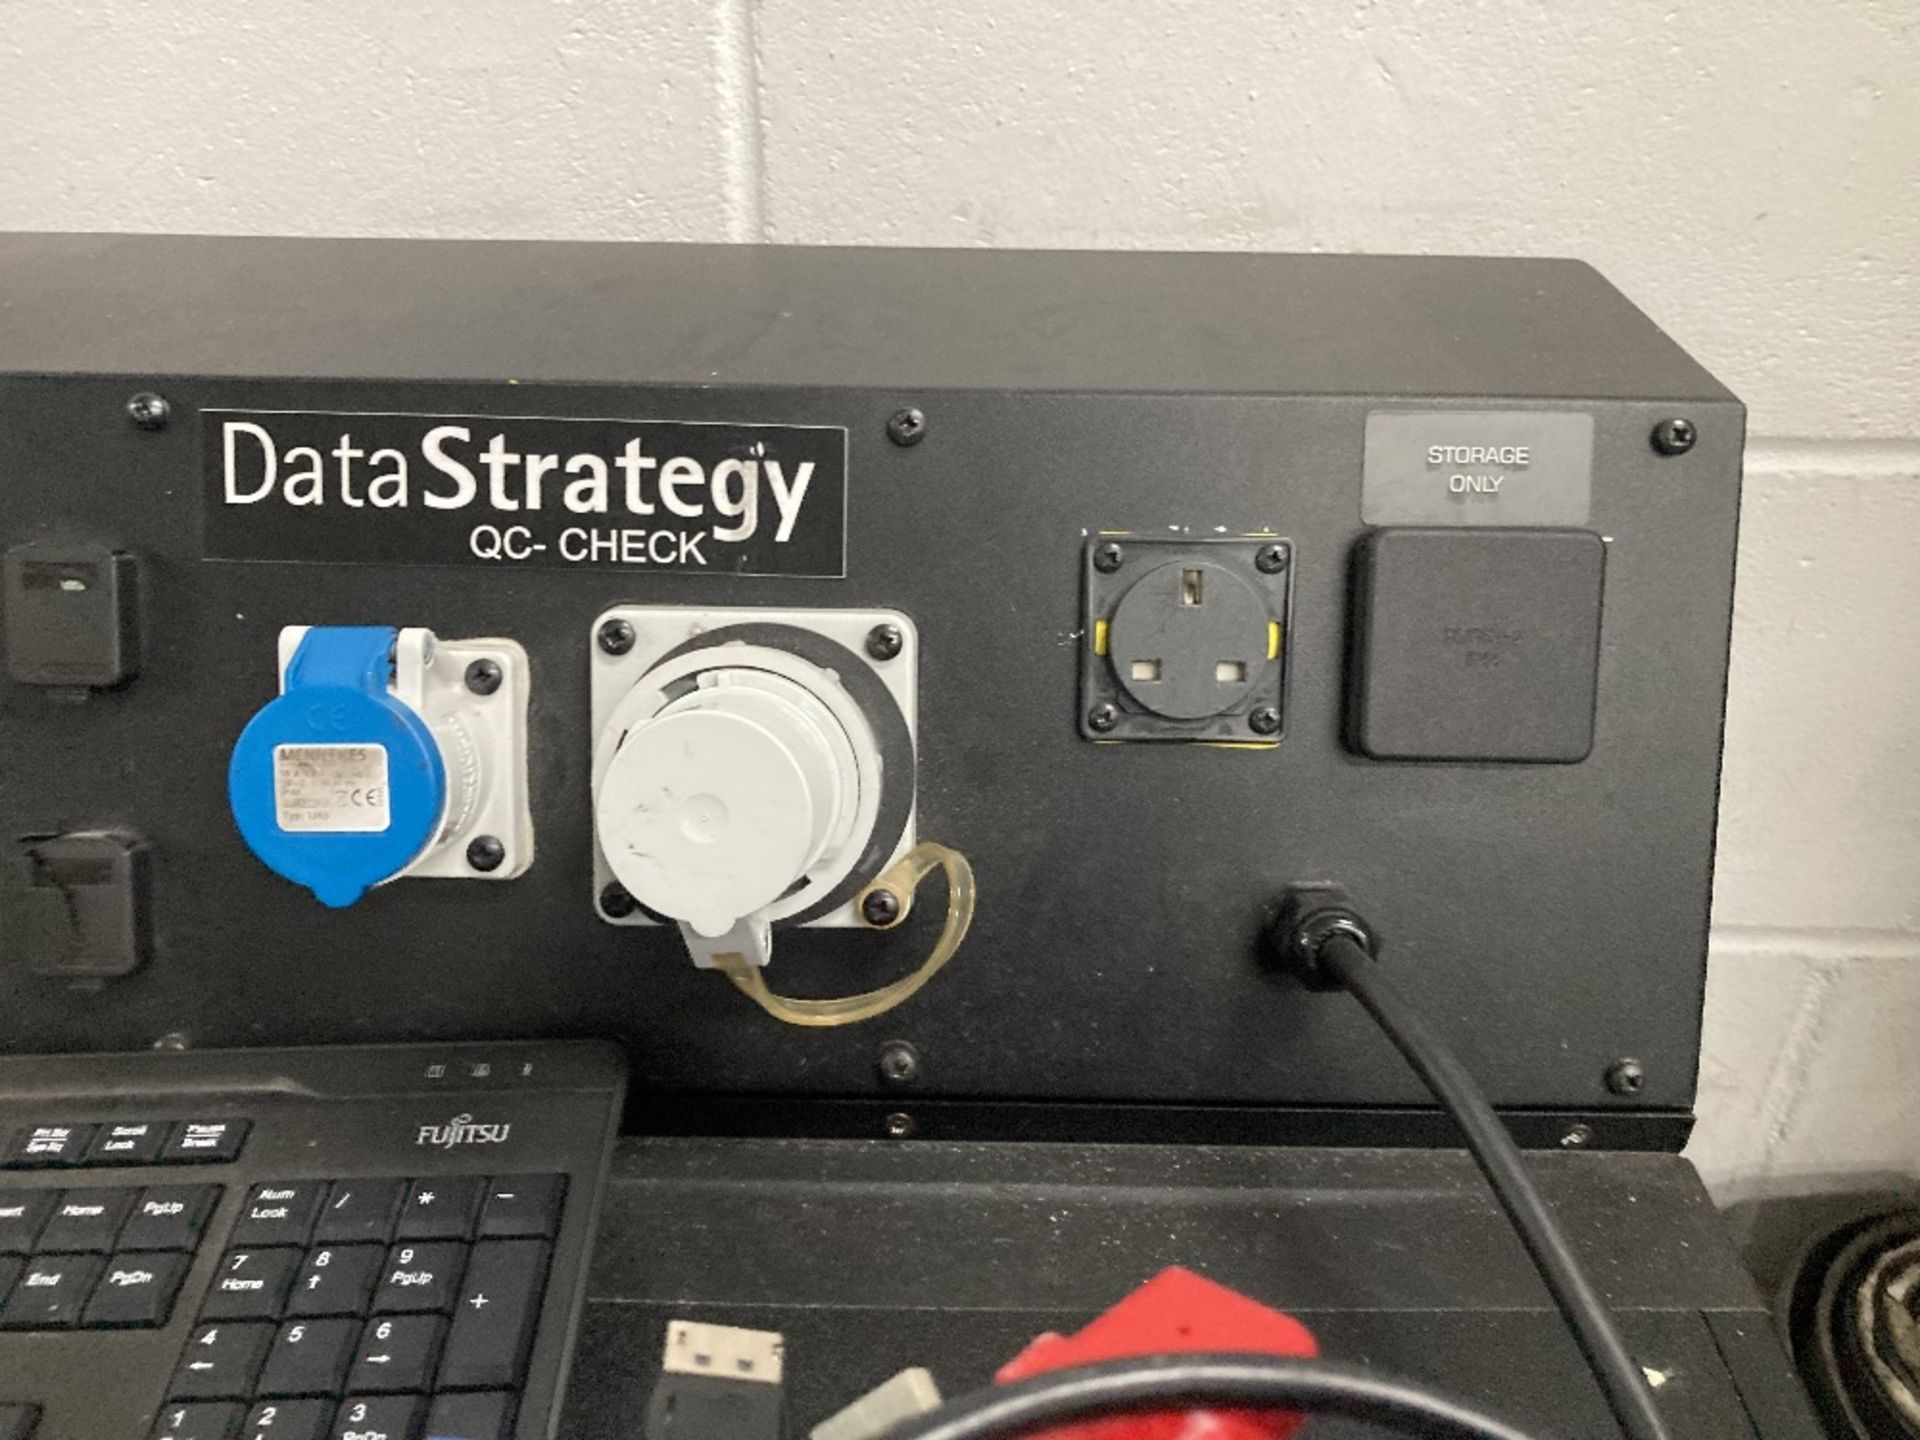 Data Strategy QC-Check Mobile Power Check Portable Appliance Test Processor PAT-4 - Image 13 of 17